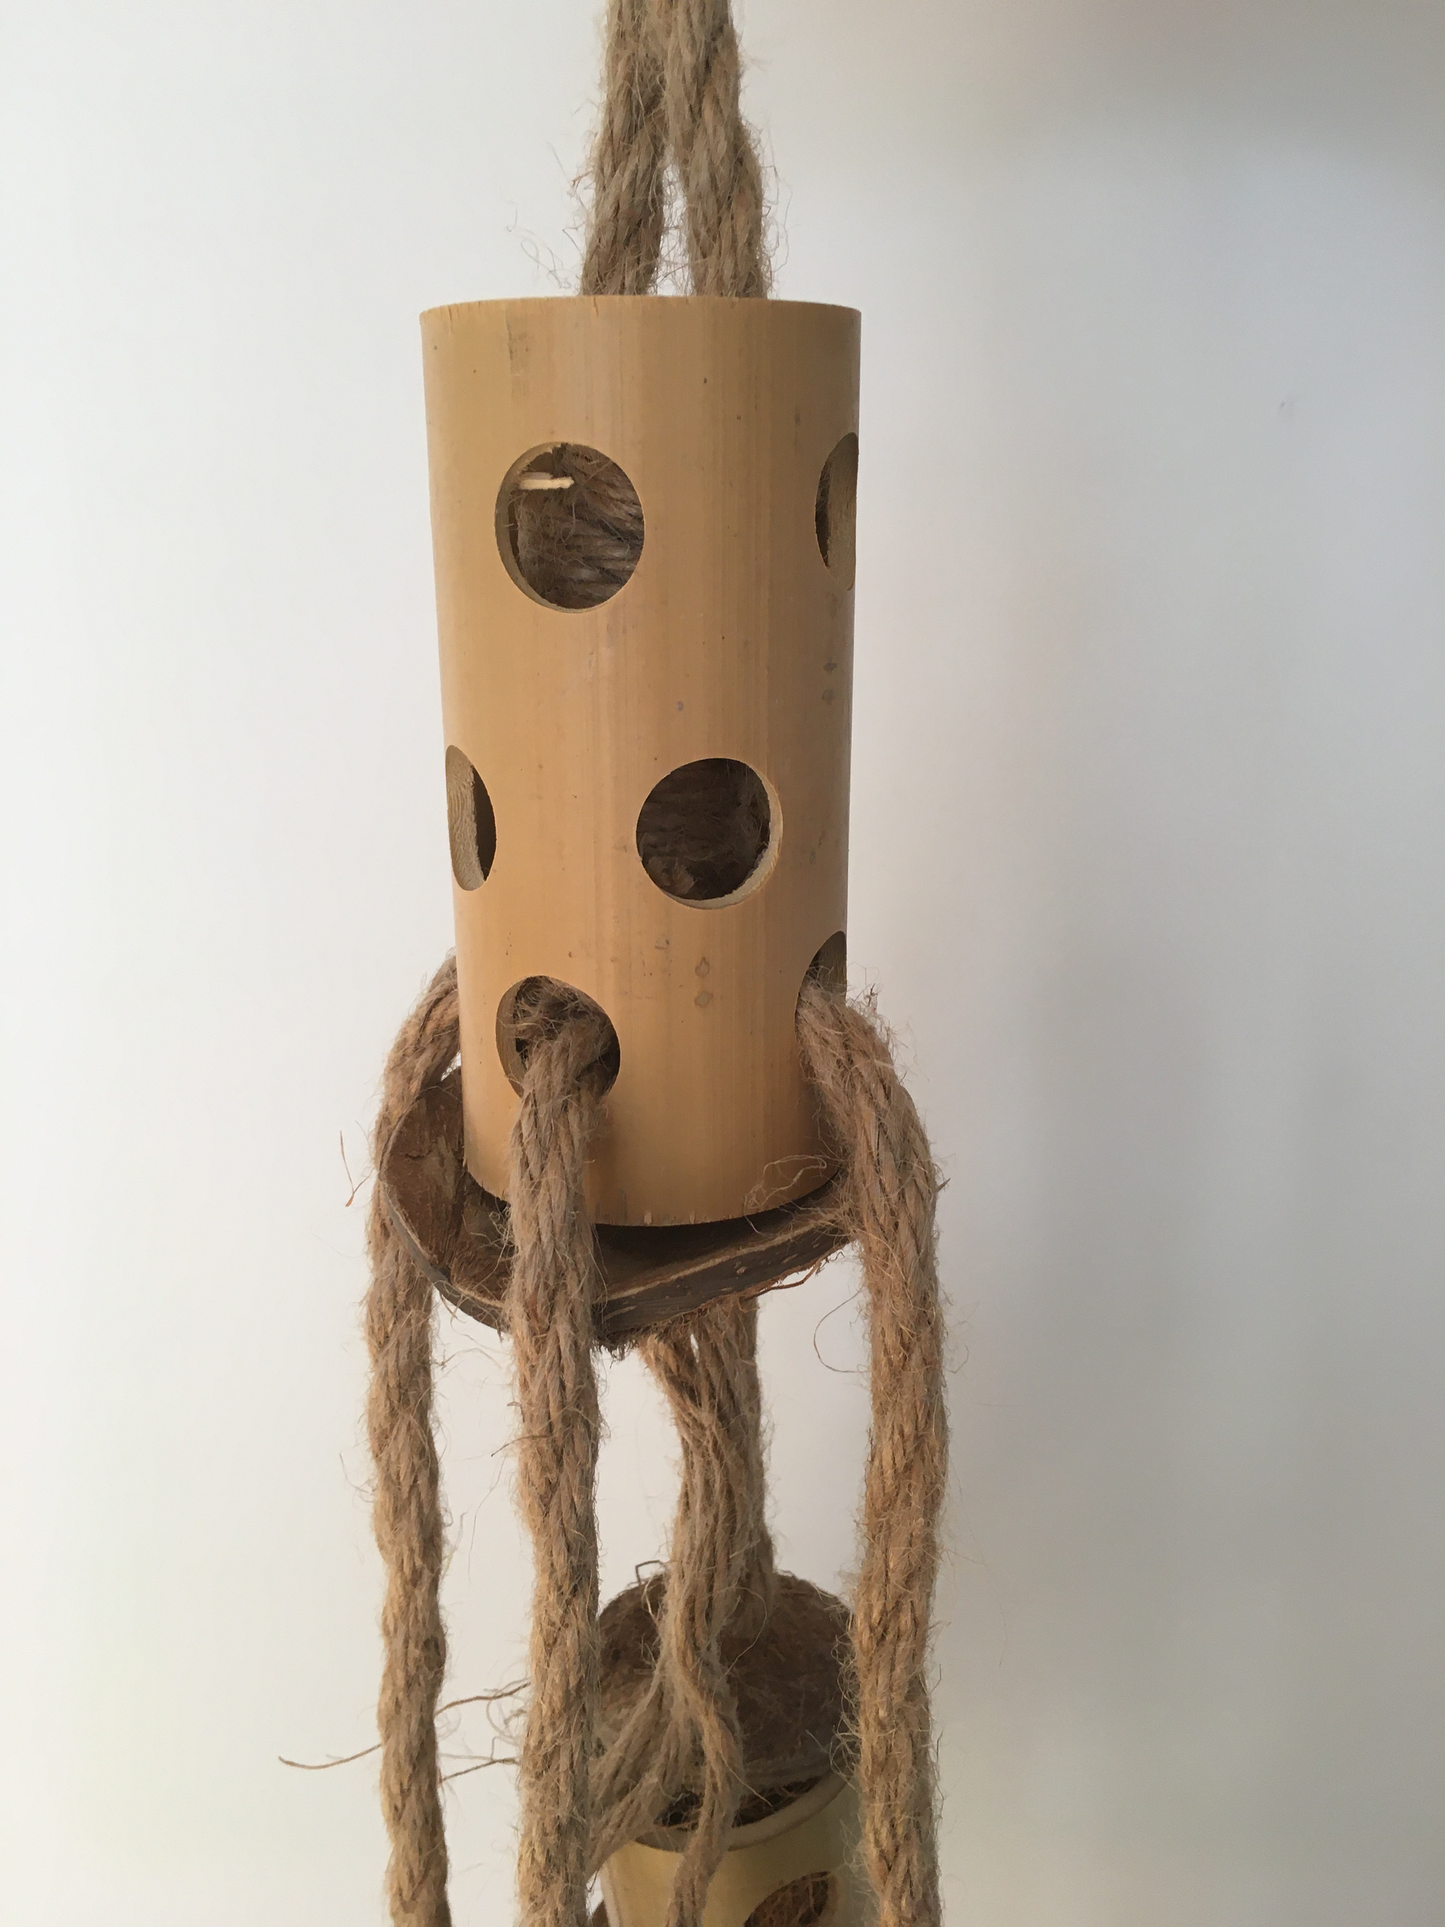 close up of the totem tower parrot toy - jute rope, wooden blocks, and coconut pieces